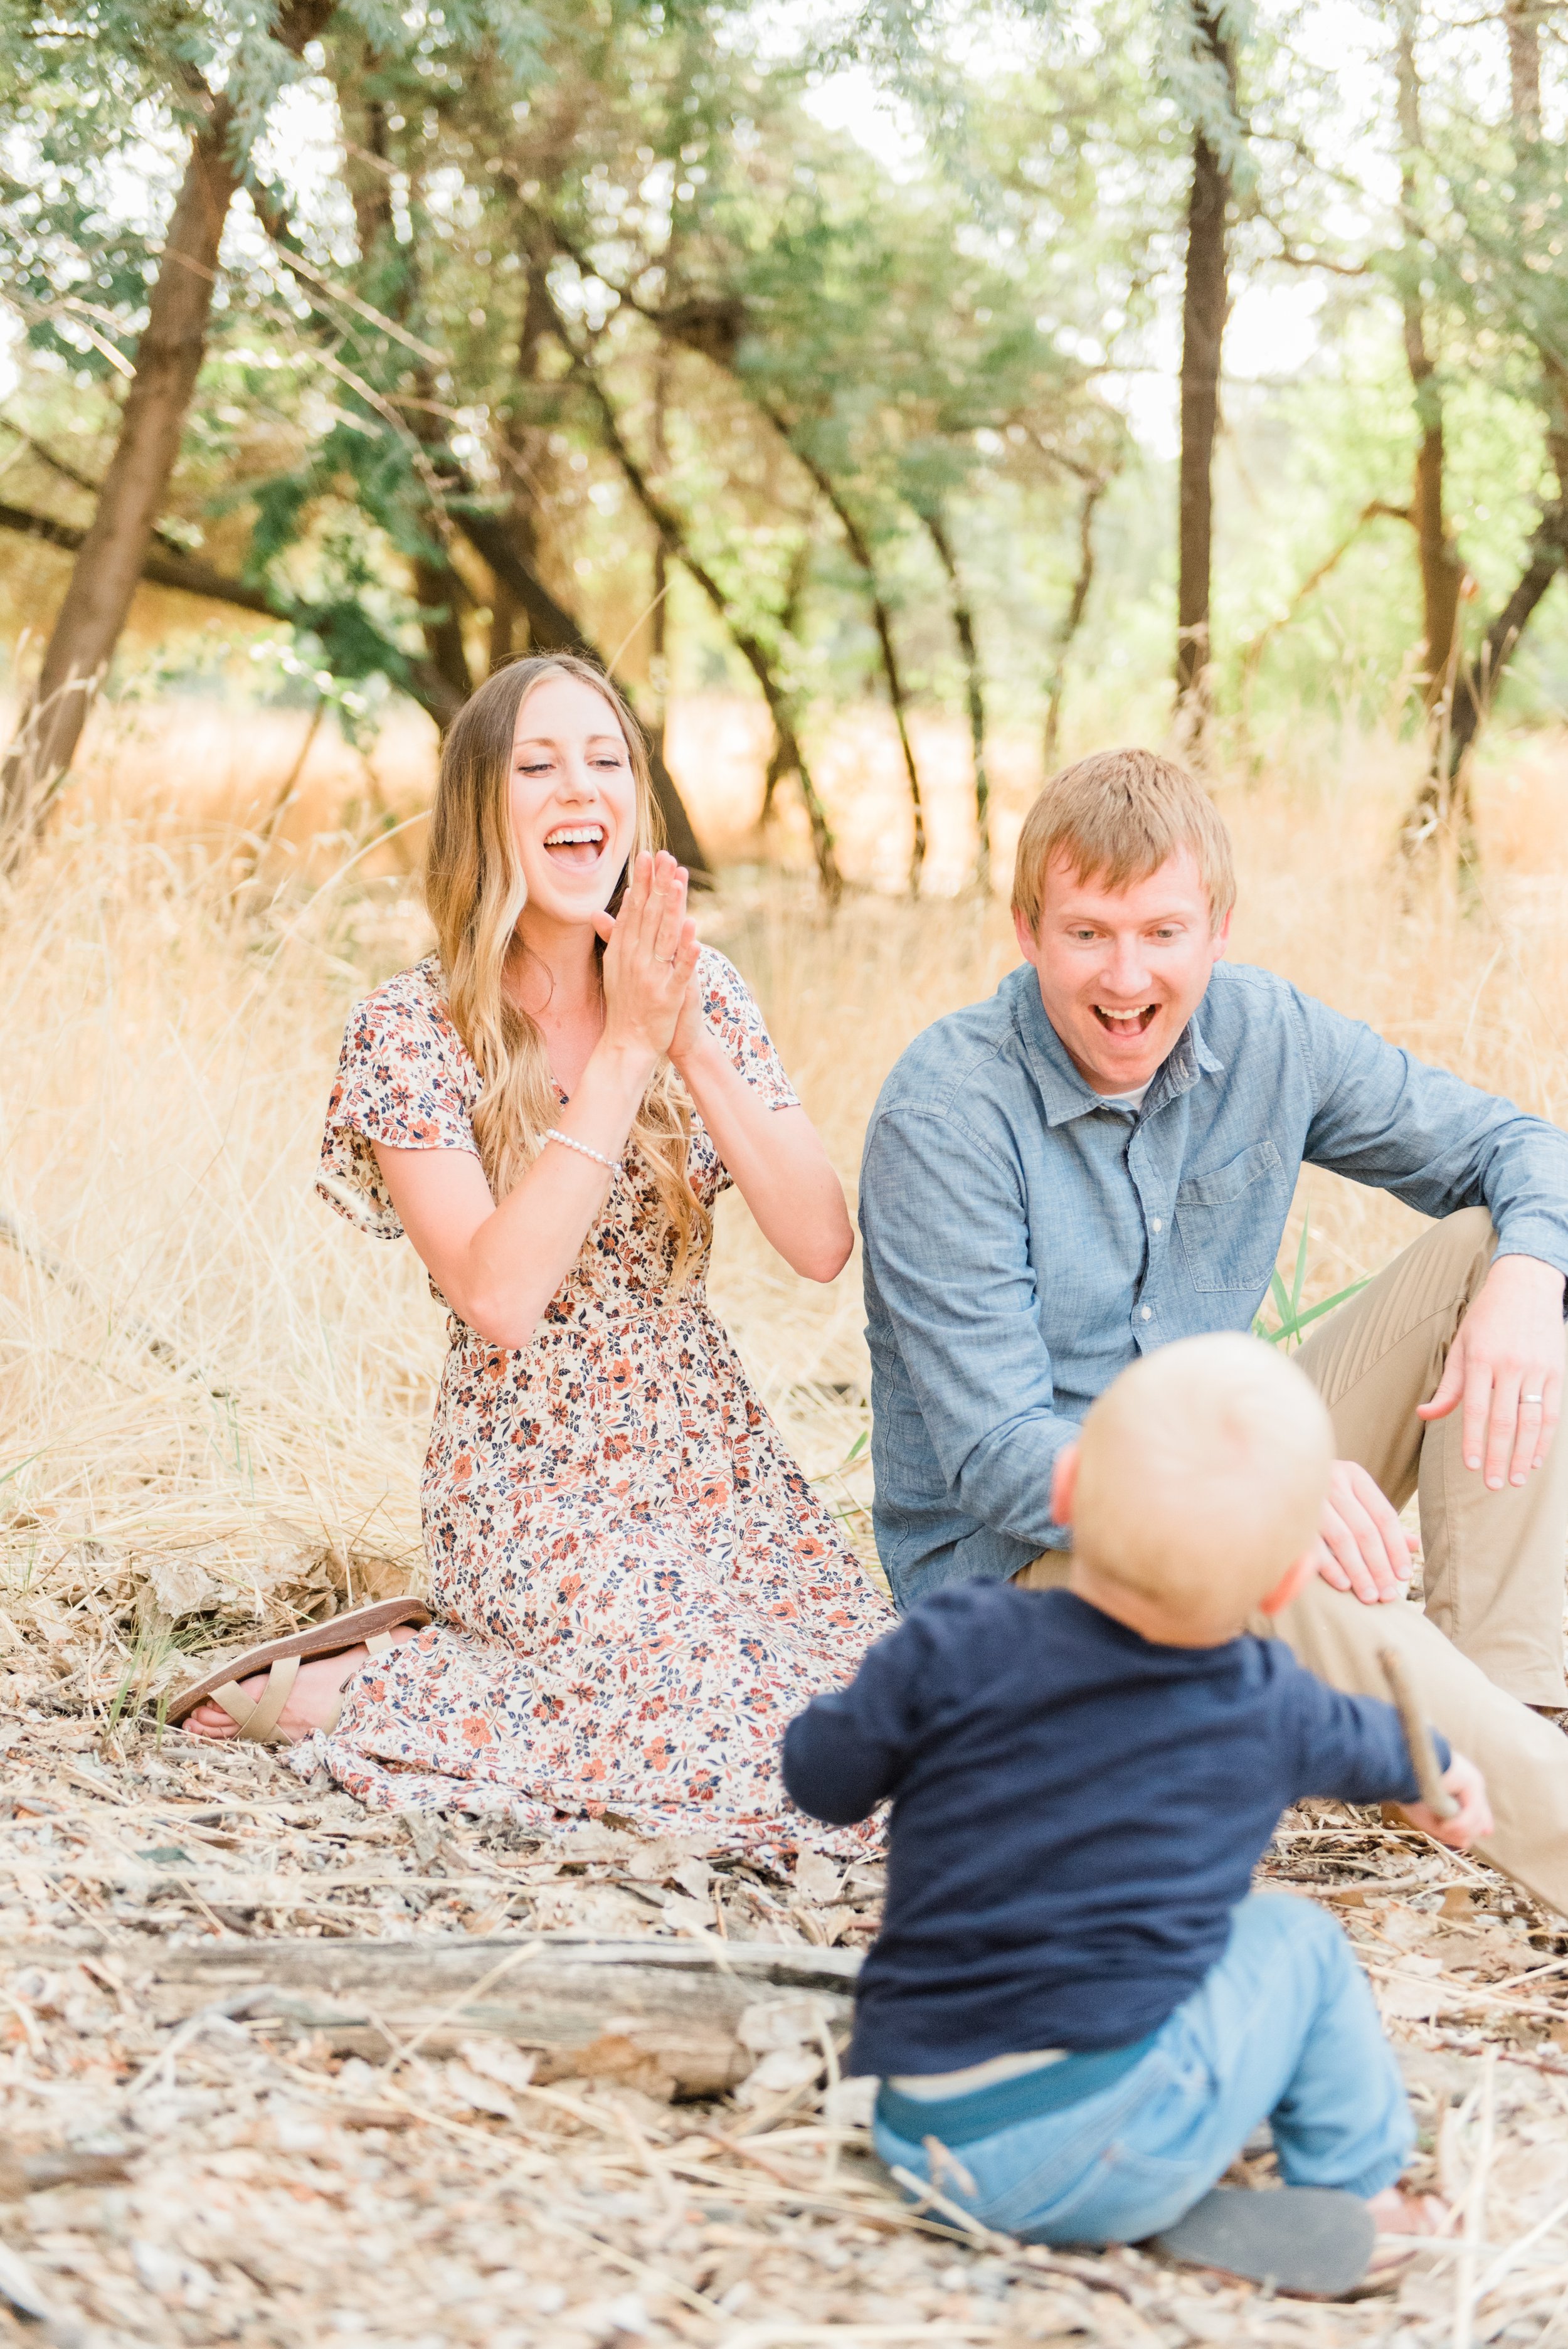  A mom and dad interact with their baby trying to make him laugh during a family photo session in Georgia. Natural laughter genuine photos personalized photoshoot #atlantafamilyphotographer #familiesofinstagram #familypics #GeorgiaFamilyPhotographer 